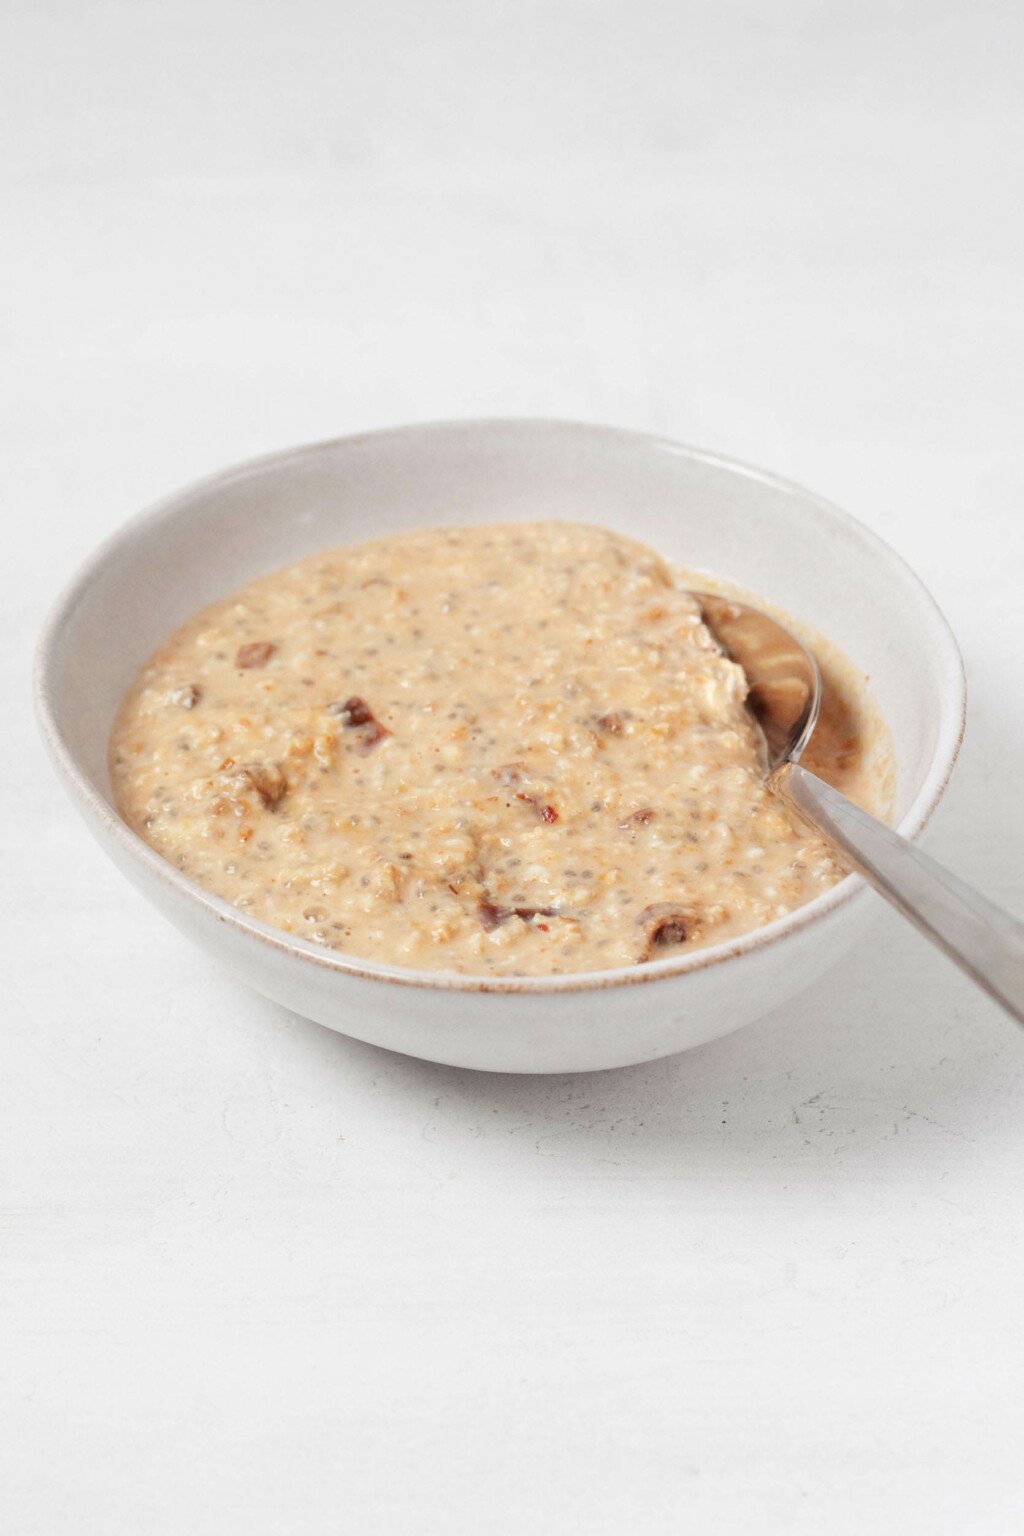 An angled photograph of a bowl of vegan pumpkin overnight oats. A silver teaspoon is resting in the oats, as if they're ready to be eaten.